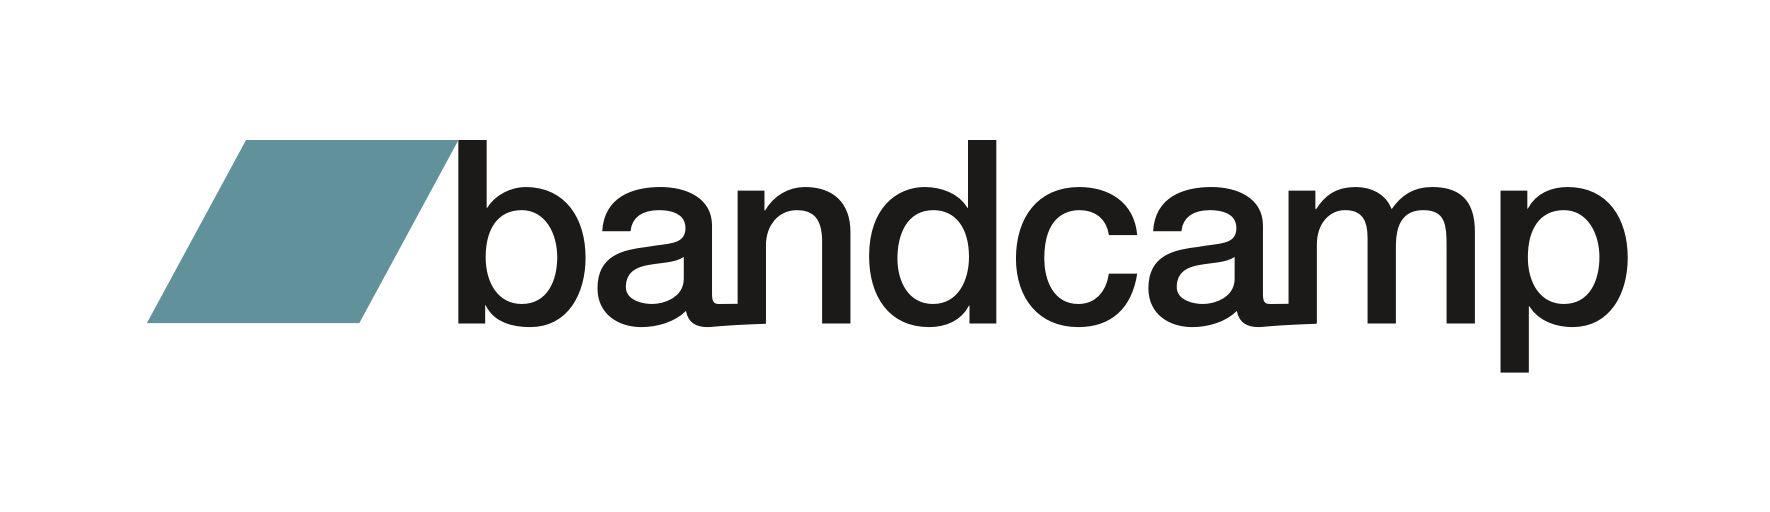 Bandcamp logotype color 512